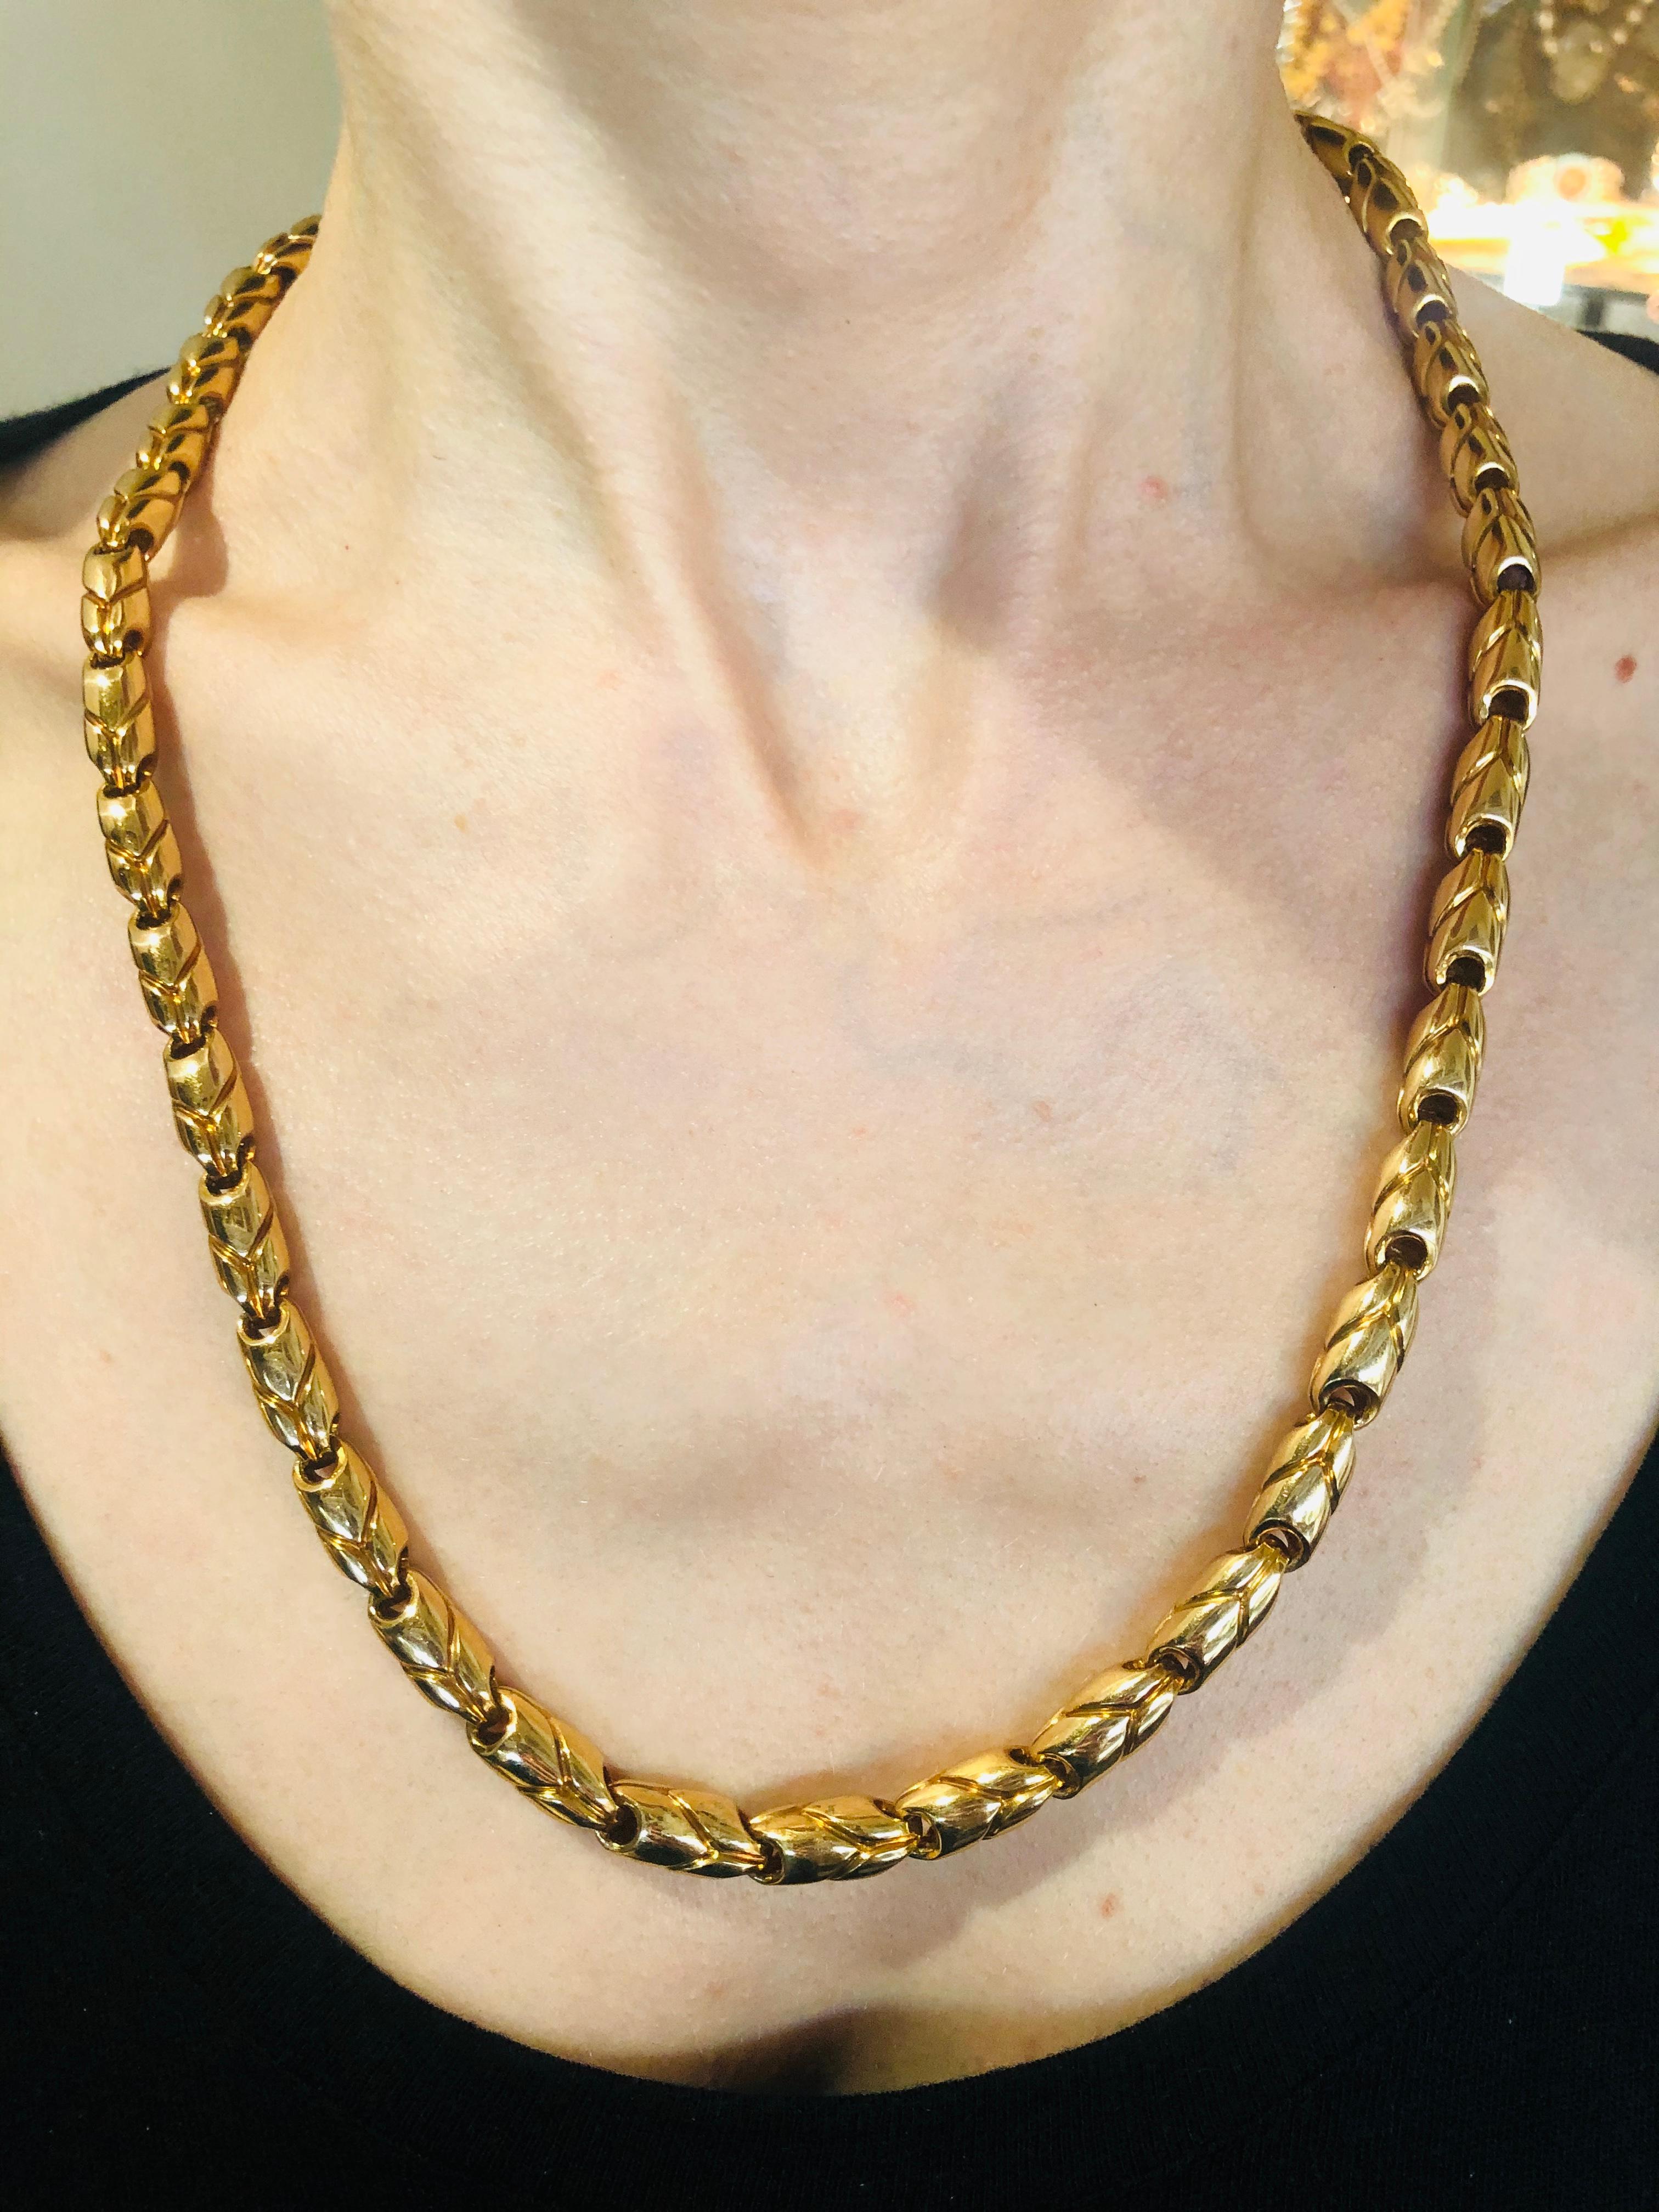 Elegant and stylish chain necklace created by Bulgari in Italy in the 1970s. Substantial and wearable, the necklace is a great addition to your jewelry collection. You will enjoy wearing it on its own as well as piling it up with your other